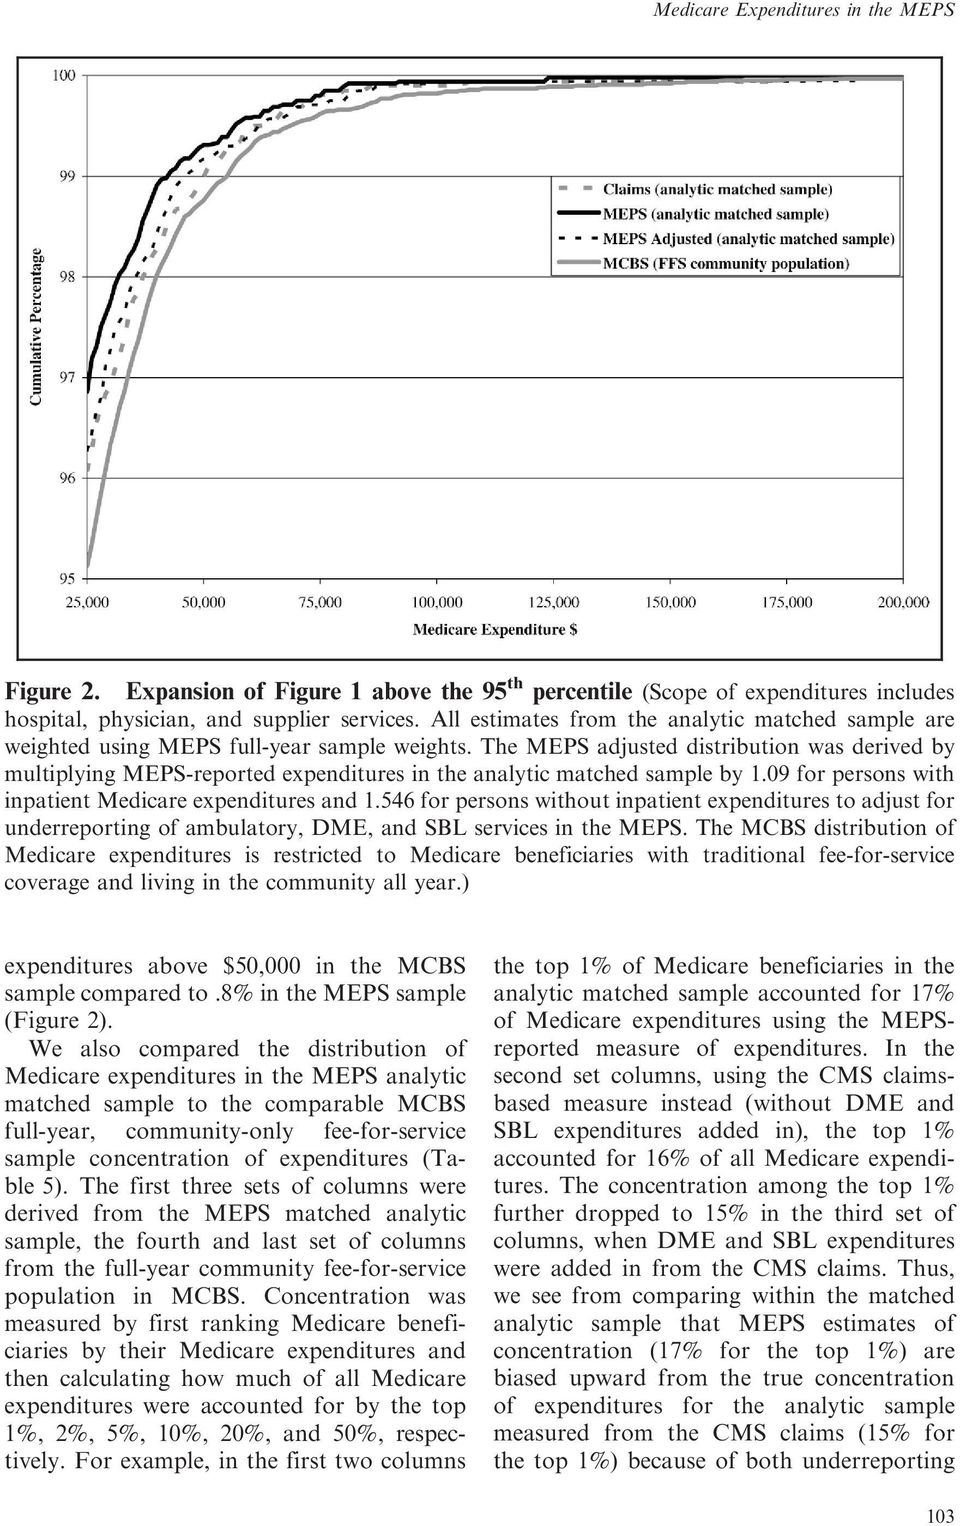 The MEPS adjusted distribution was derived by multiplying MEPS-reported expenditures in the analytic matched sample by 1.09 for persons with inpatient Medicare expenditures and 1.